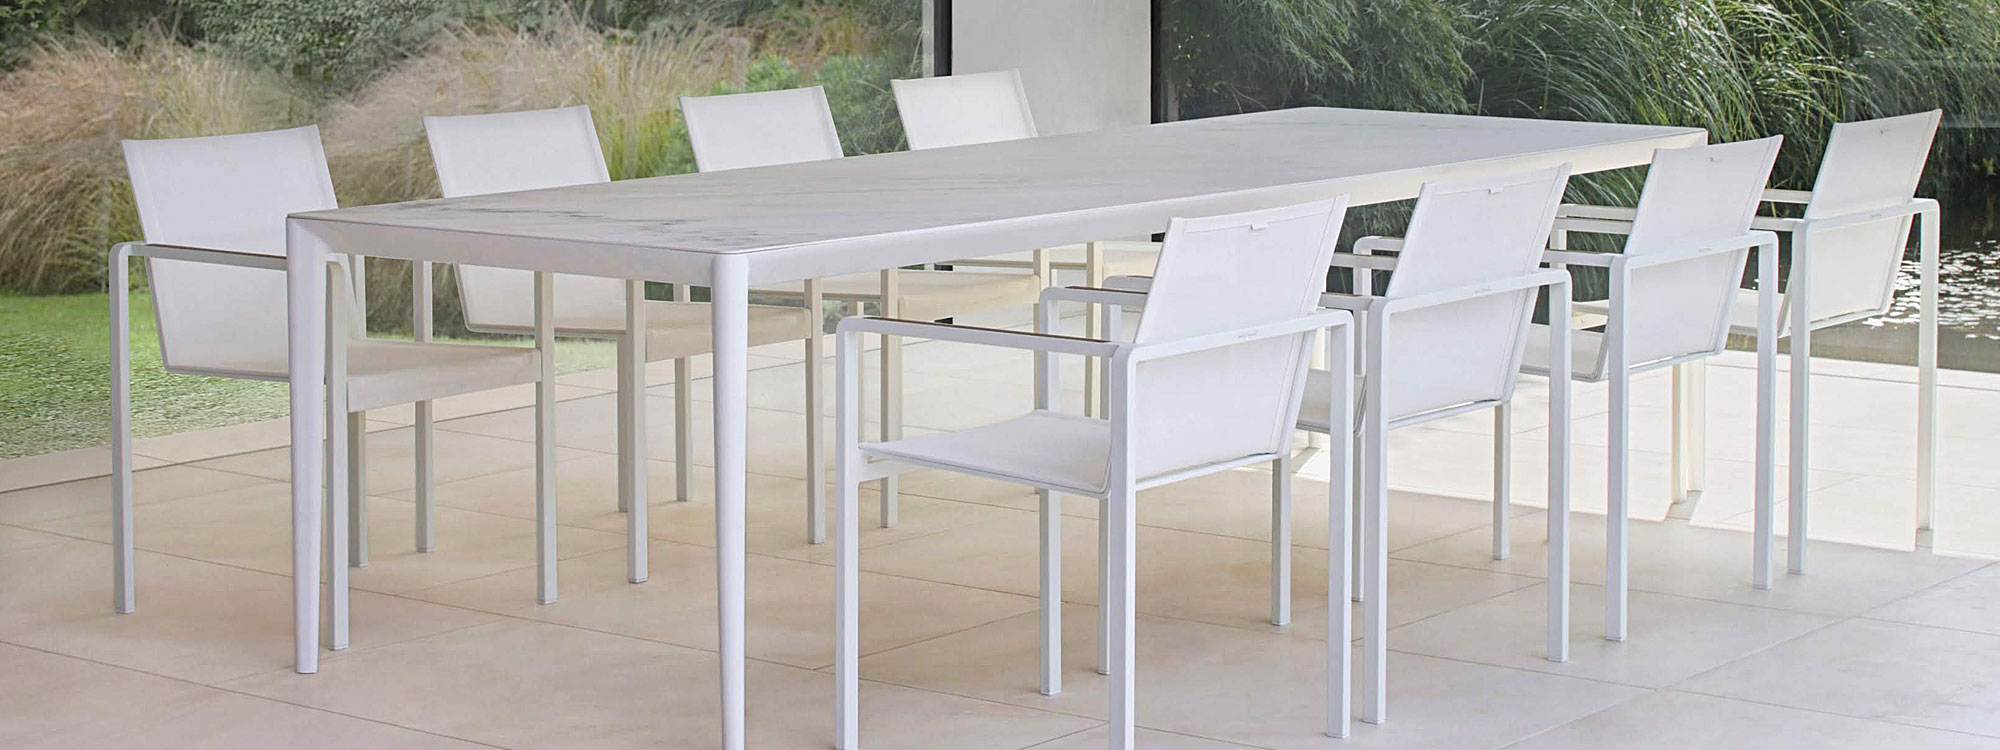 Image of White Alura chairs & Unite table with Bianco Statuario ceramic top by Royal Botania